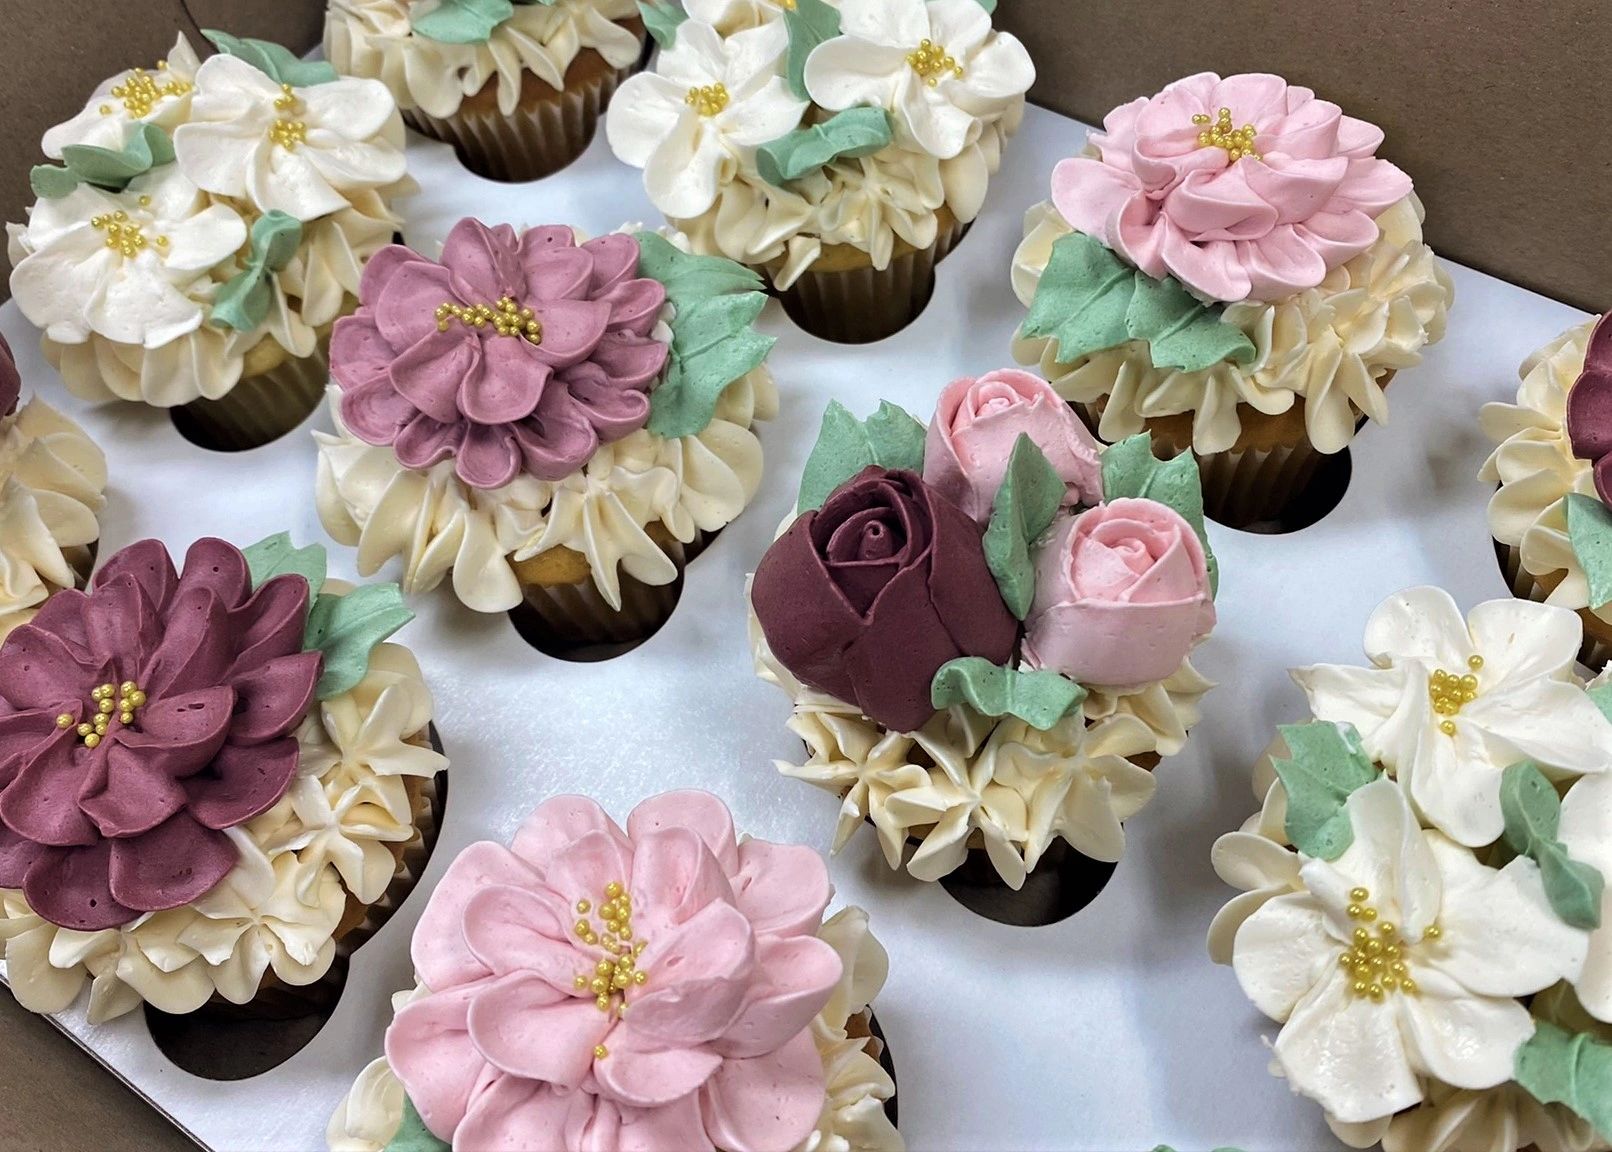 Cupcakes Delivery in Bangalore | Order Cupcakes Online in Bangalore